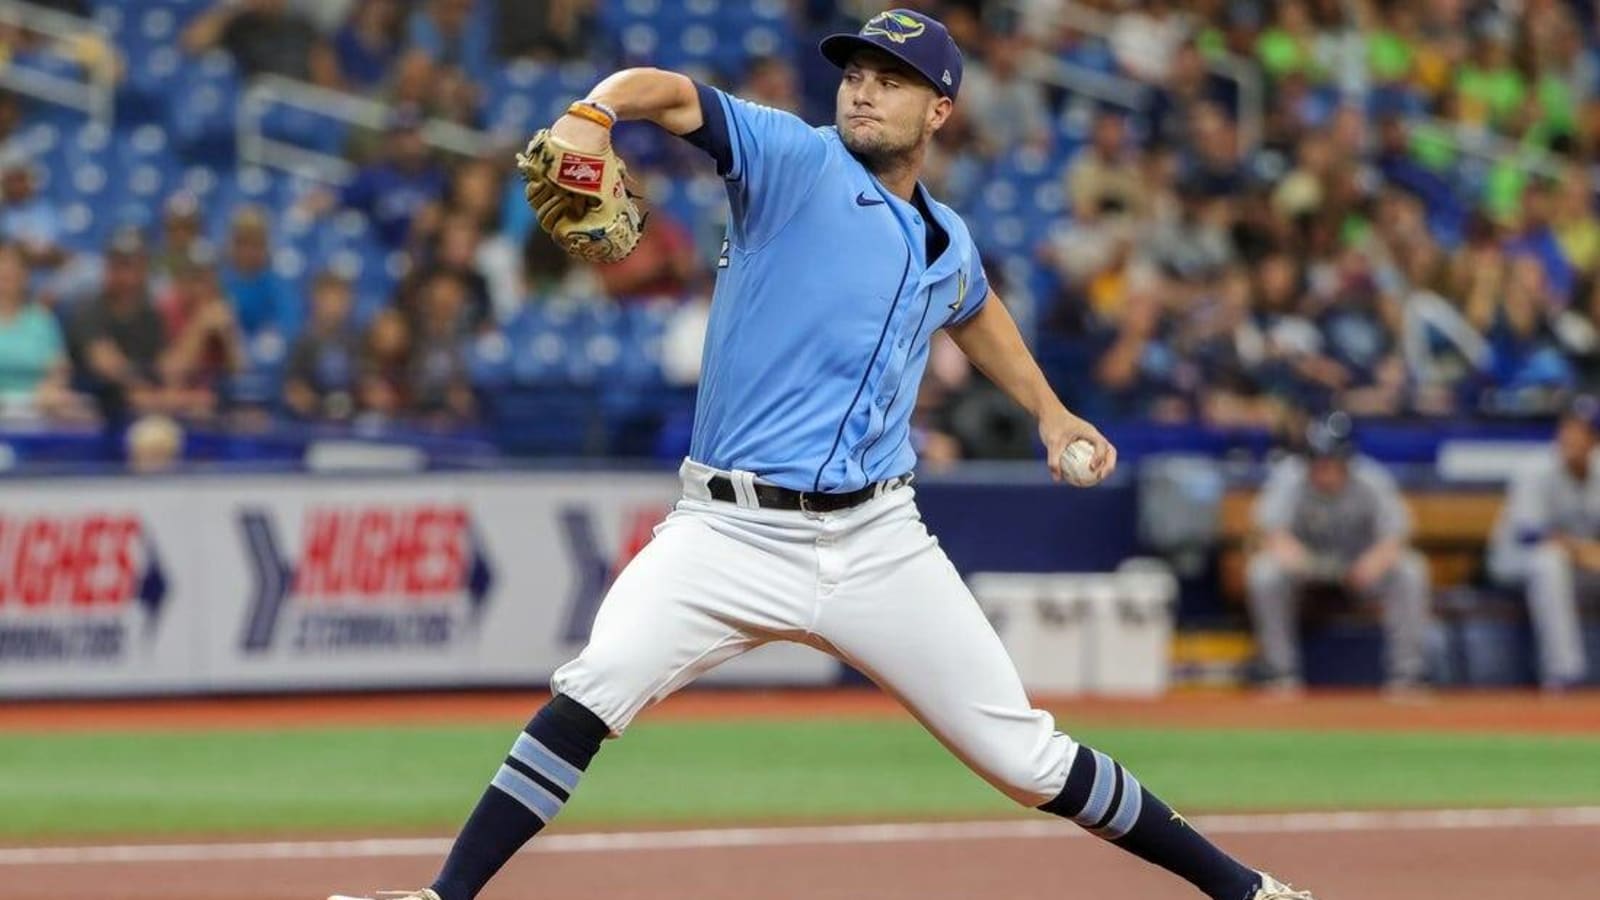 Rays meet Astros in matchup of playoff teams